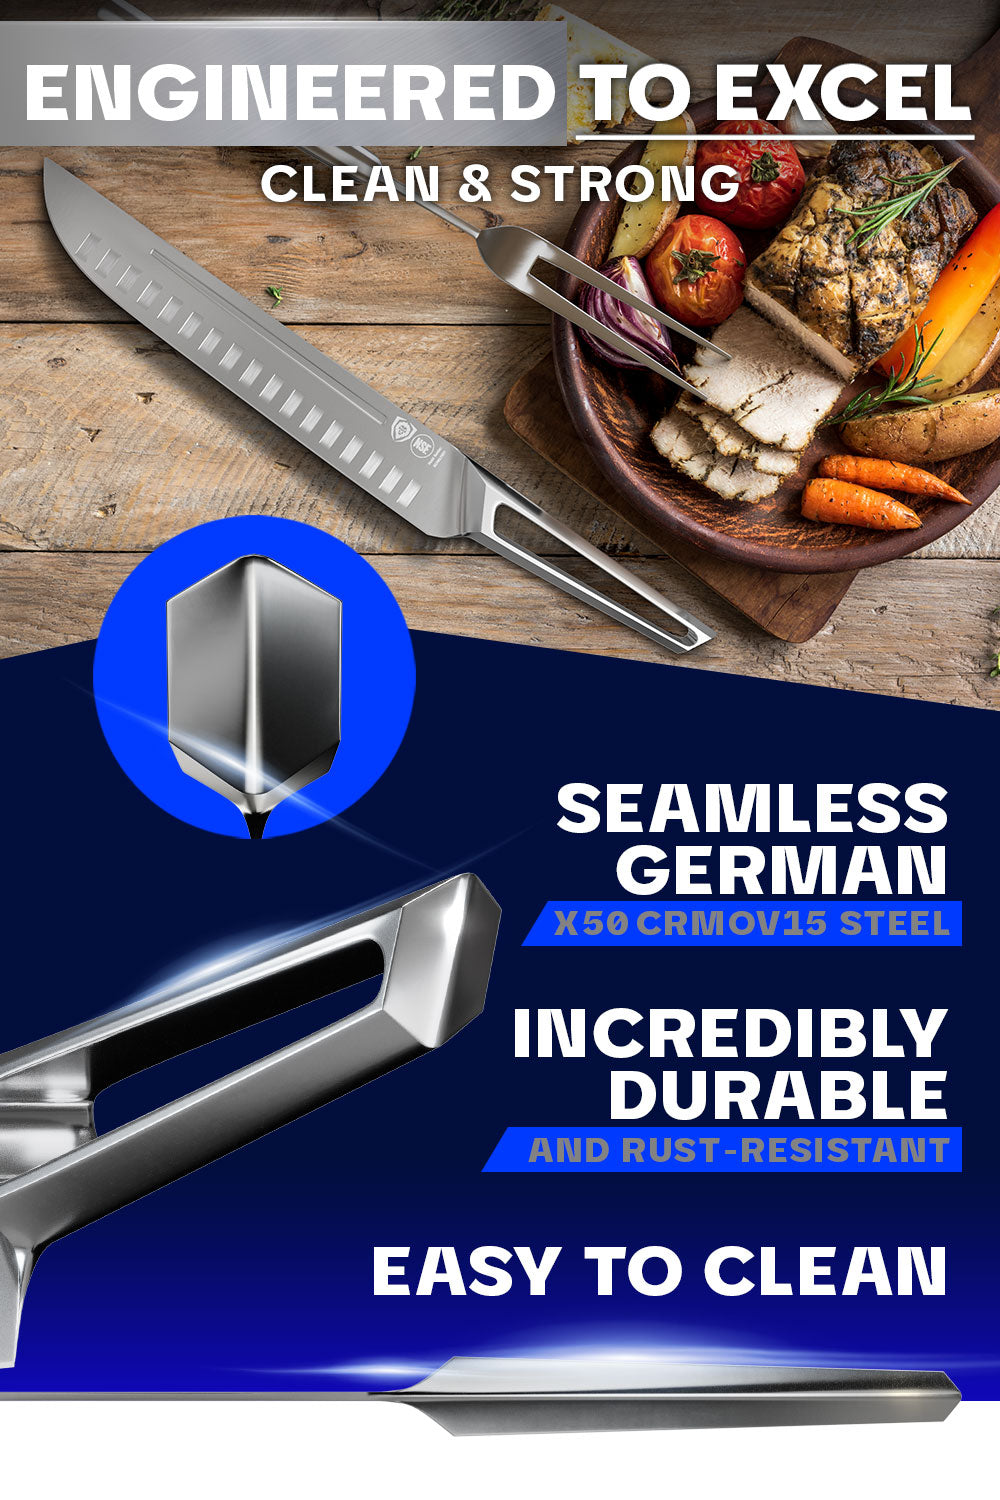 Dalstrong crusader series carving and fork set featuring it's german steel handle.